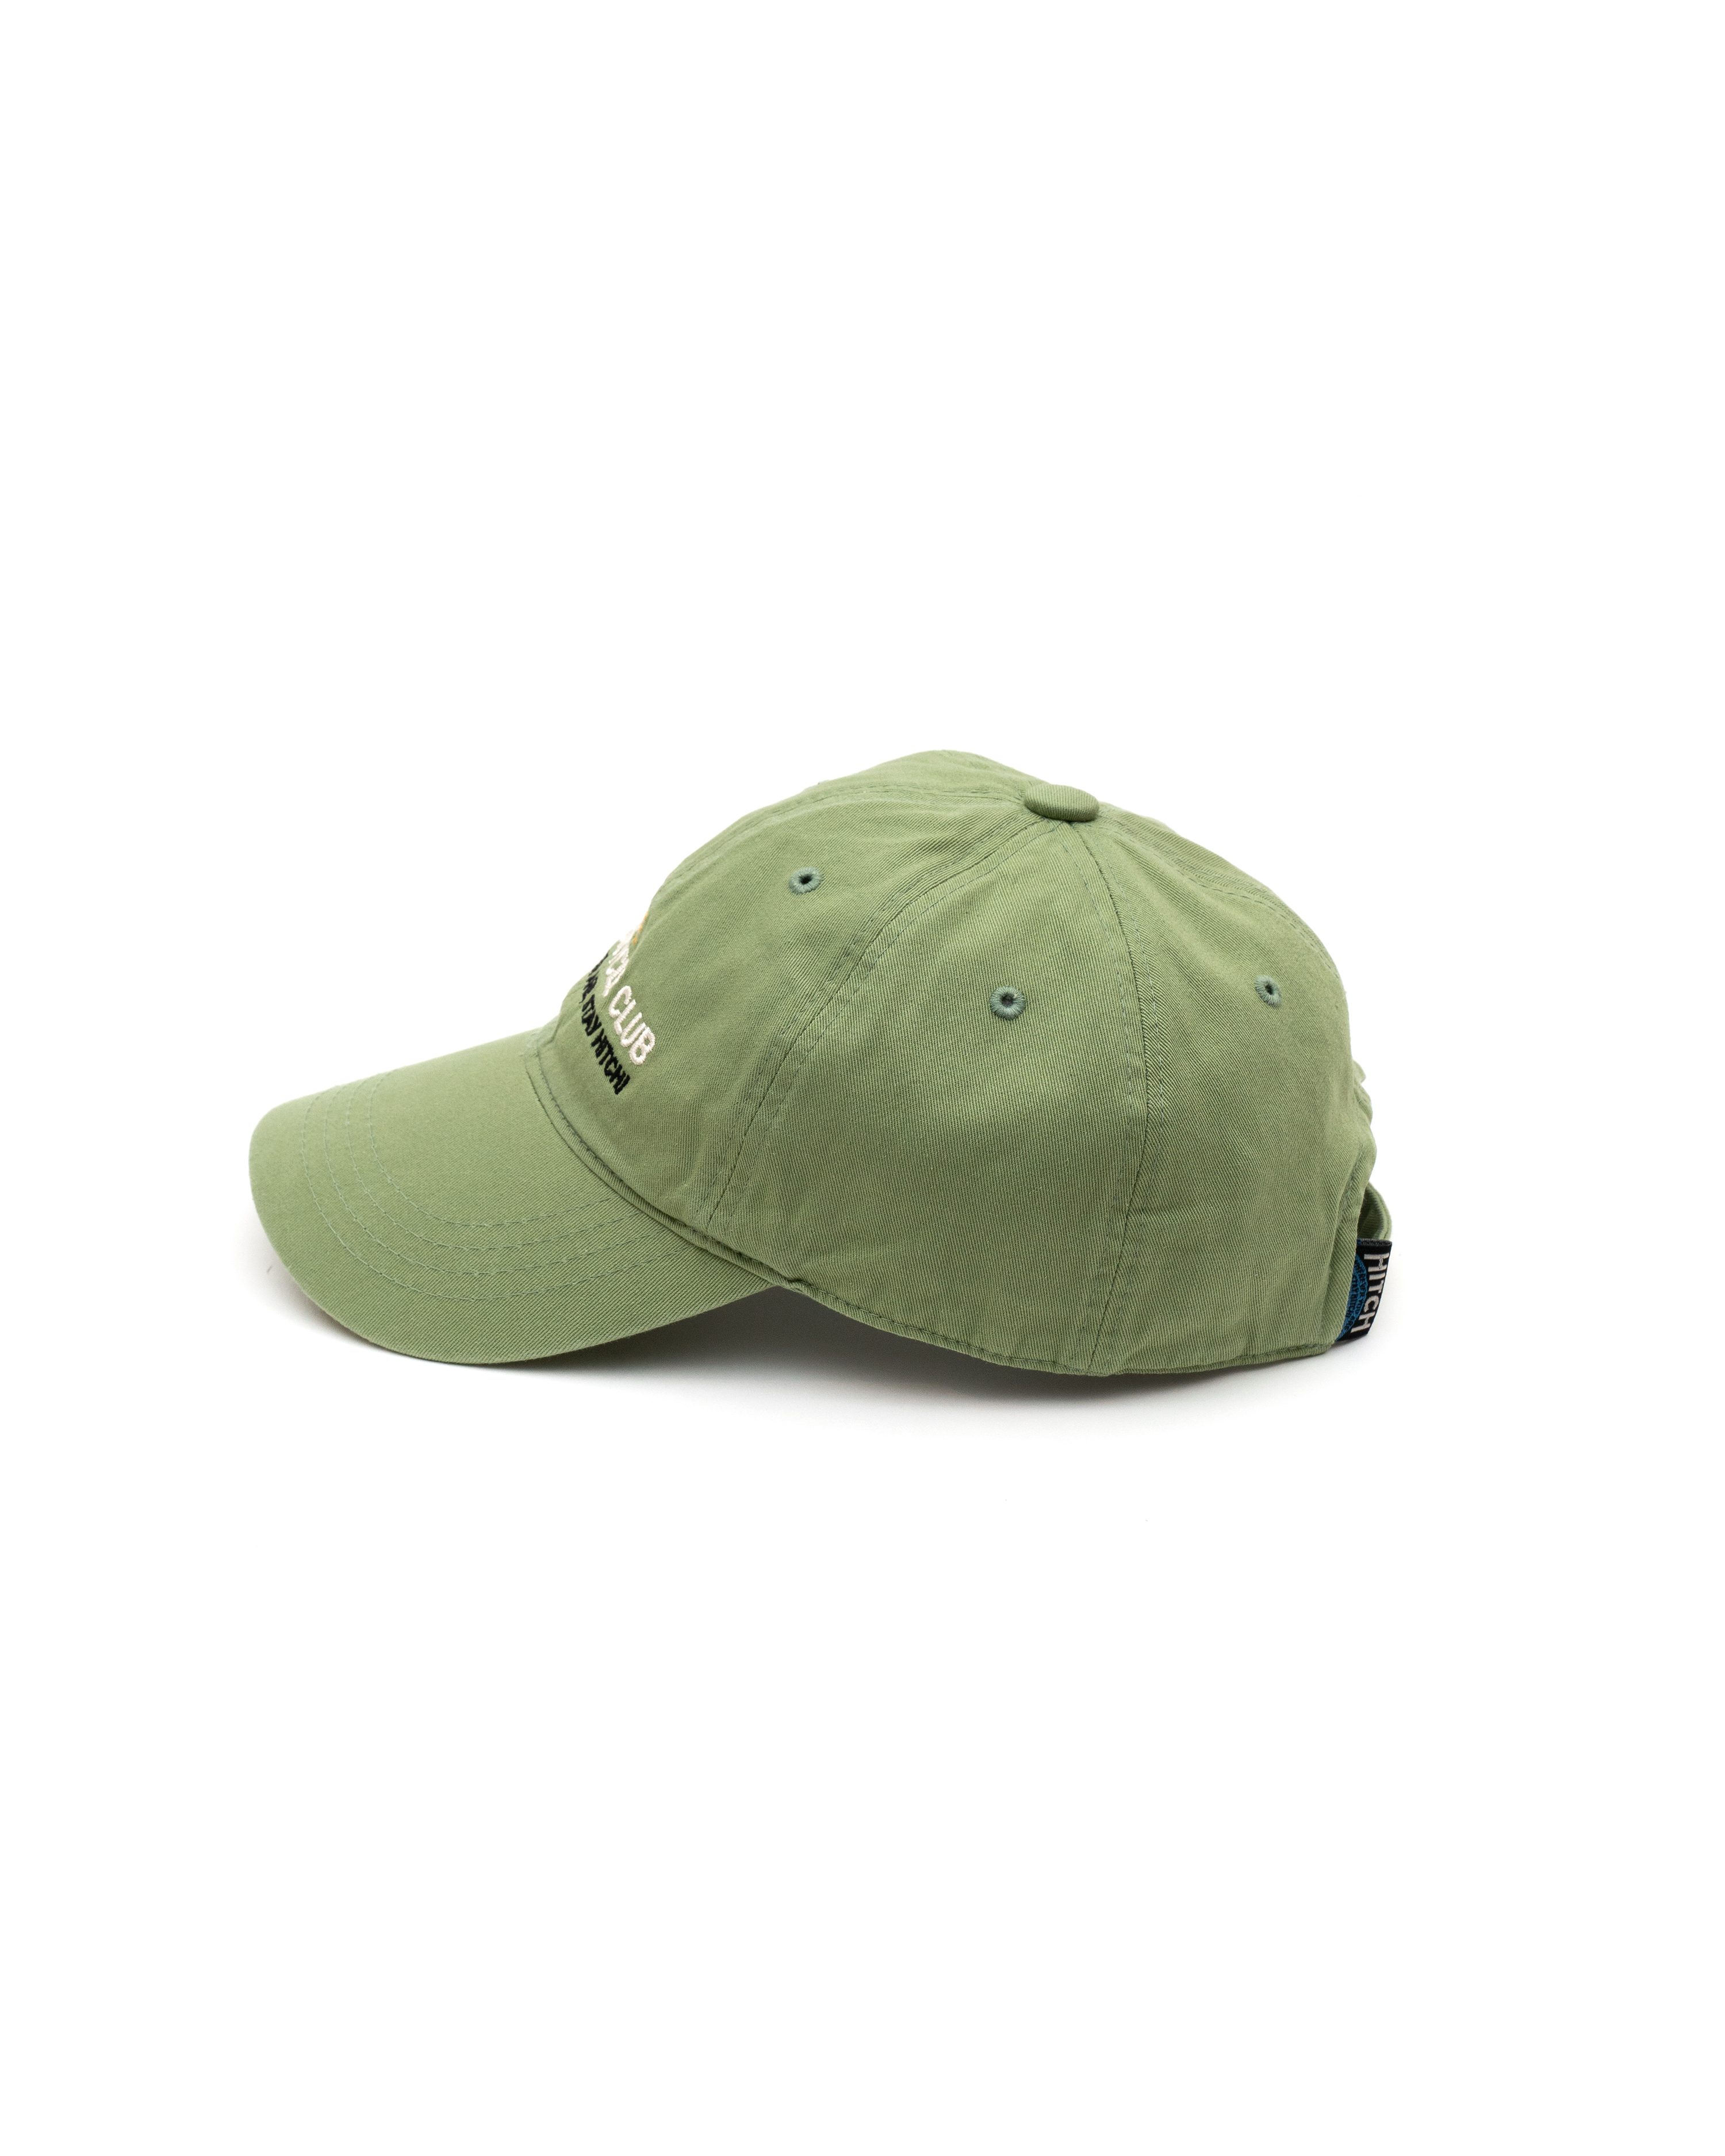 Campus 1 - olive green